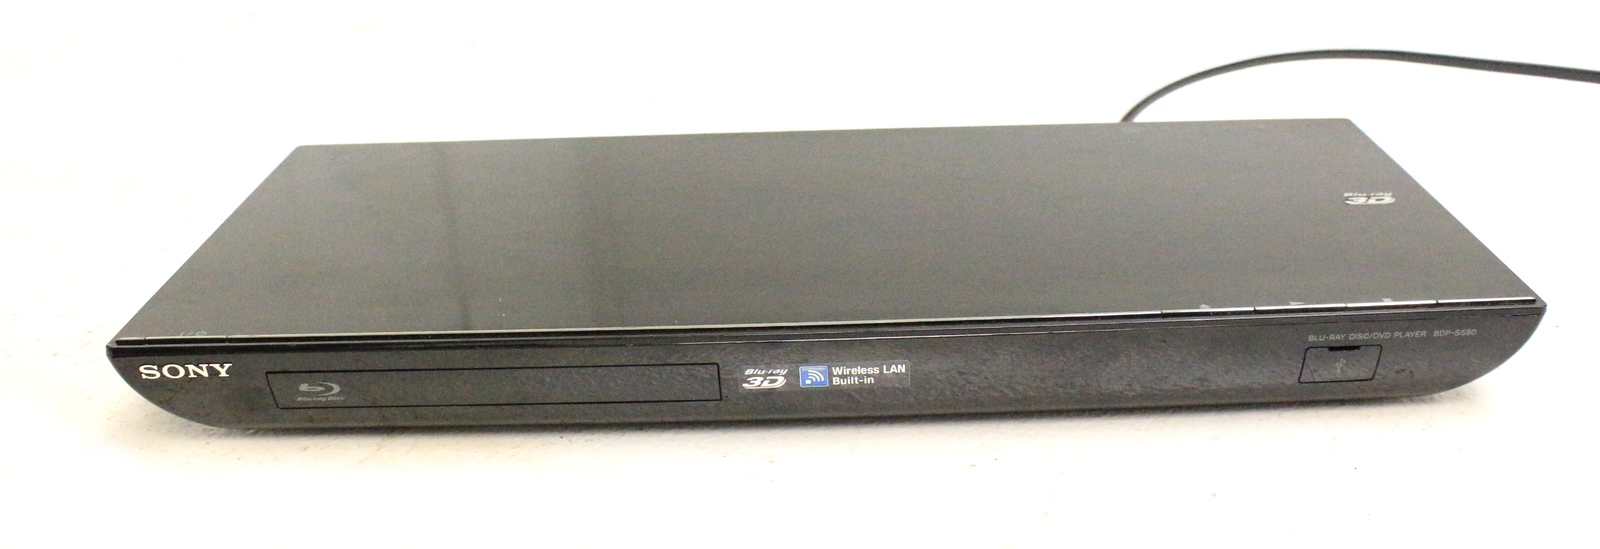 Primary image for Sony Blu-ray player Bdps590 367810